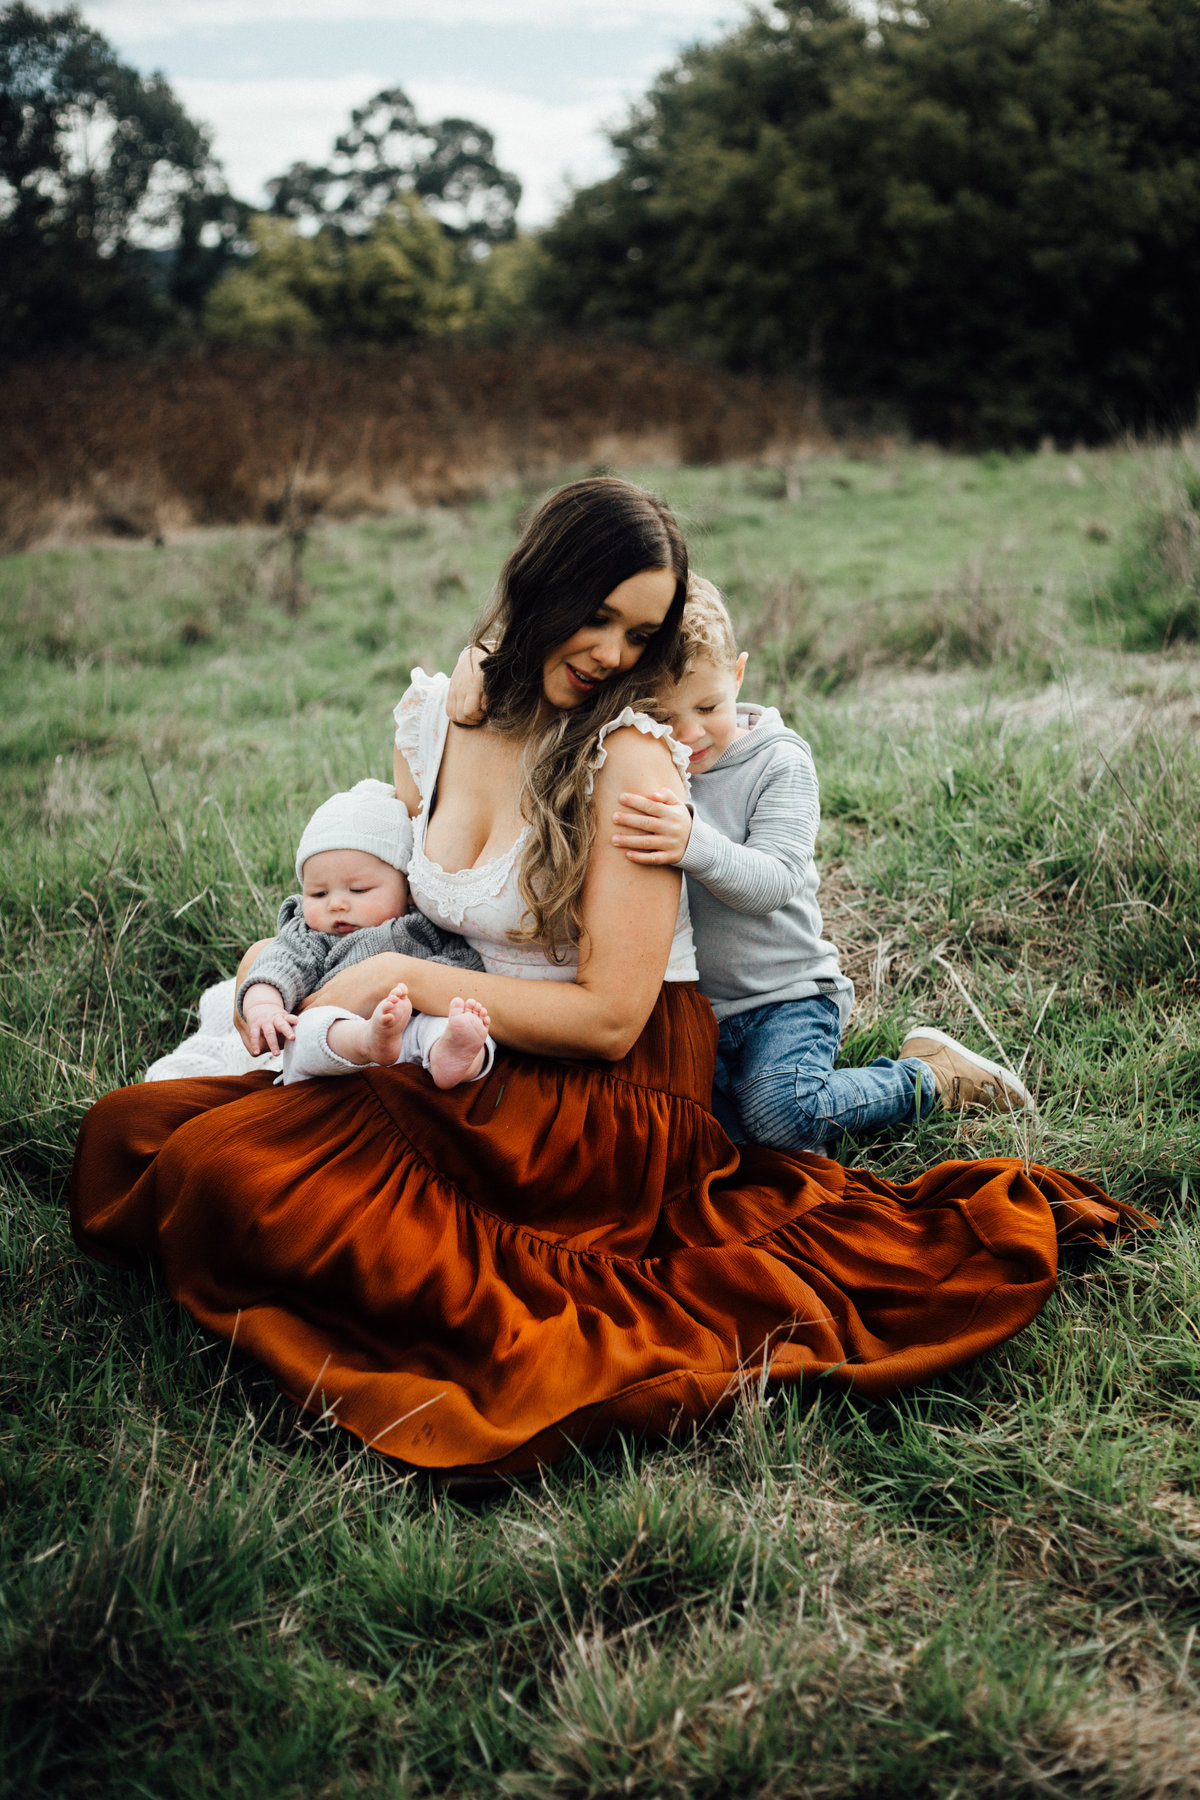 Mum and Children Photo in long grassy field Yarra Valley. Melbourne Family Photographer. Sapphire and Stone Photography